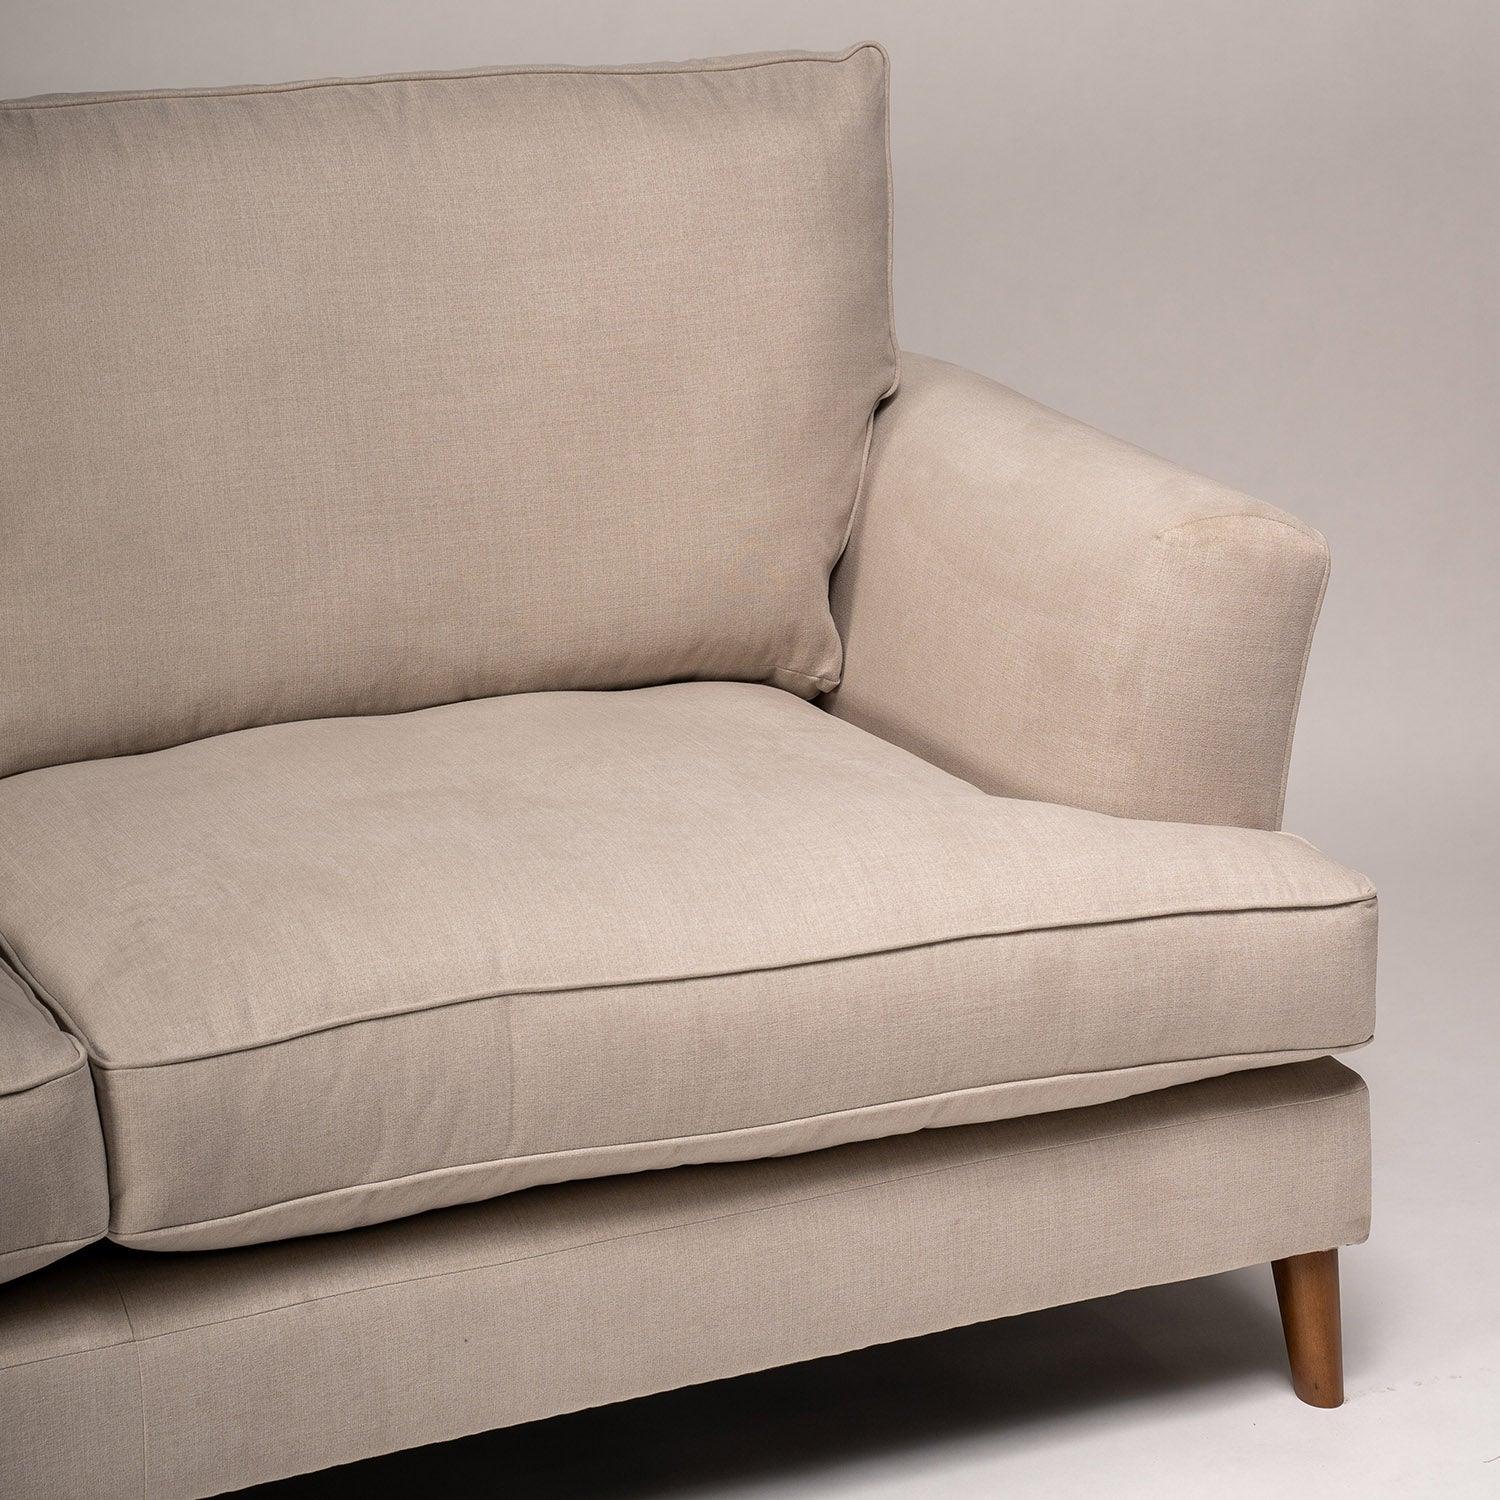 Frankie small sofa - 2 seater - Natural Clay - Laura James